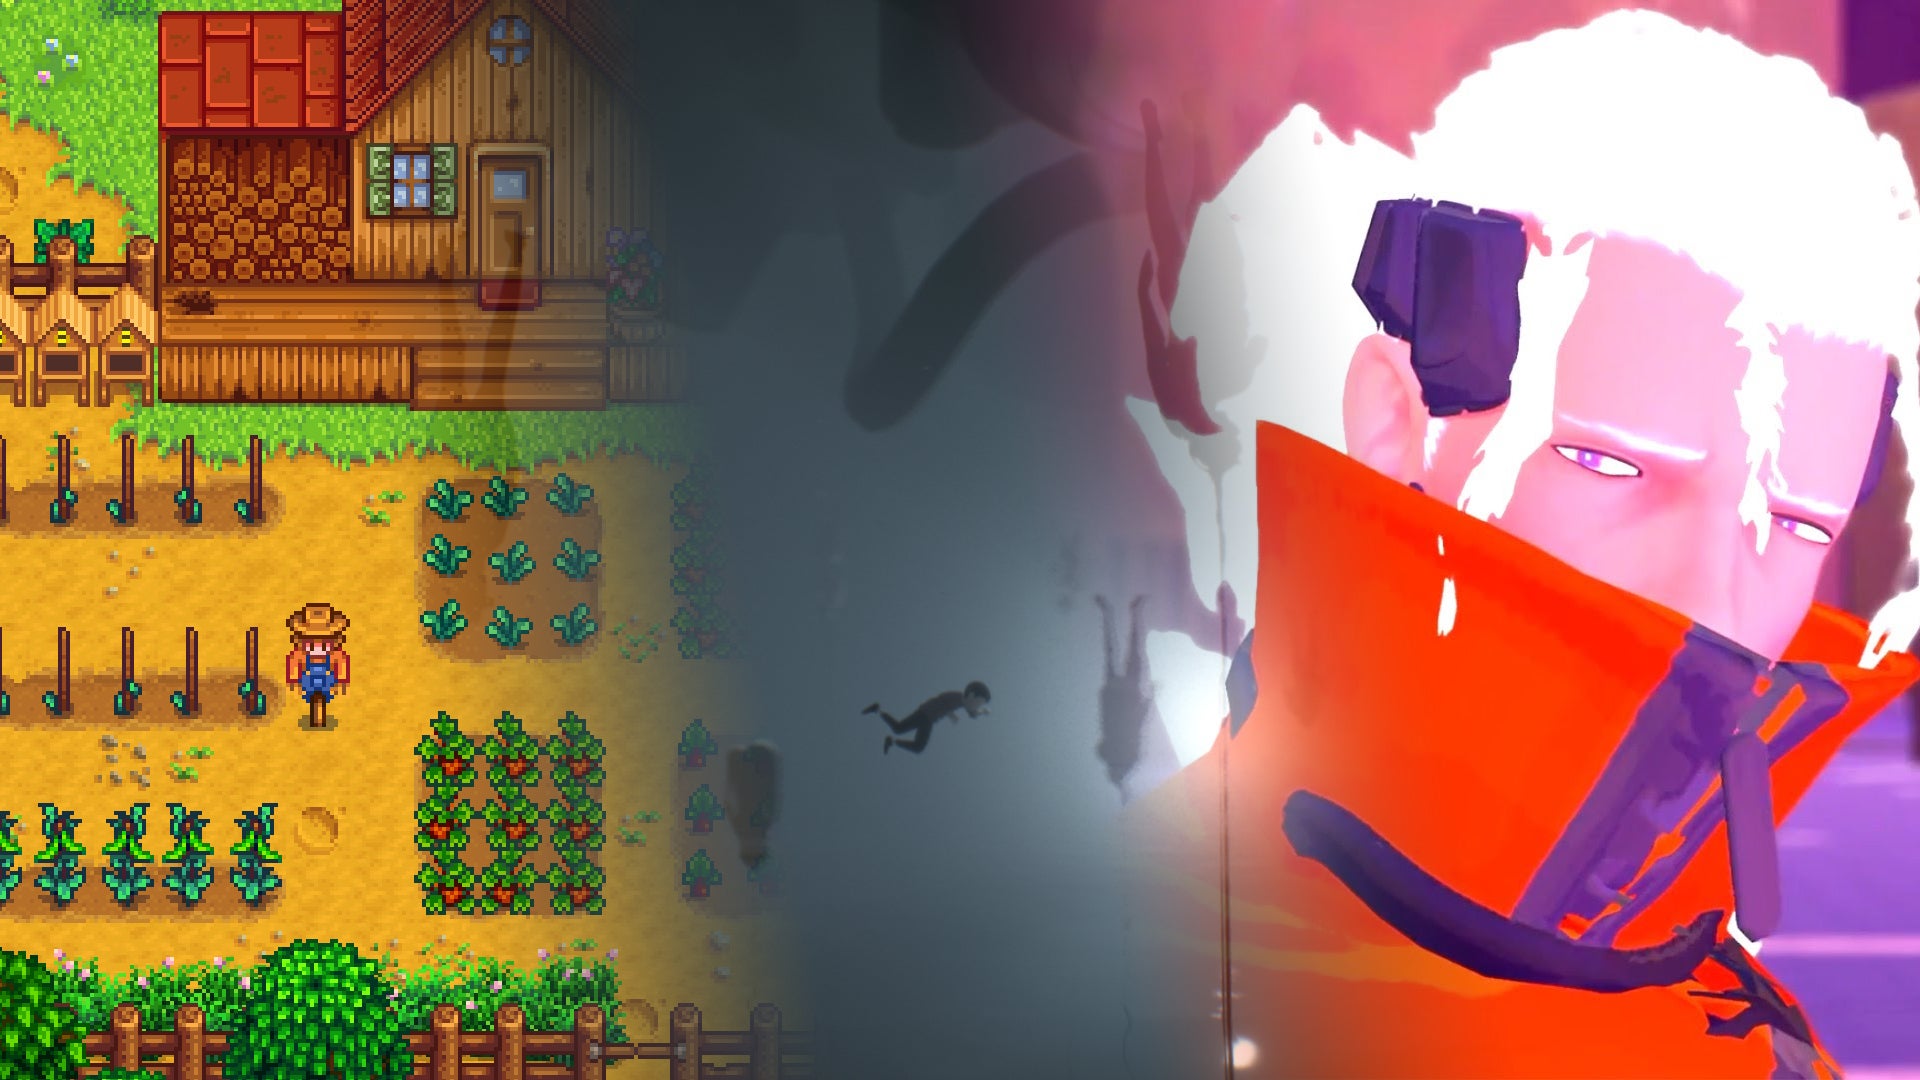 Image for VG247 Games of the Year Awards, part 3: The Indies That Delighted And Charmed Us